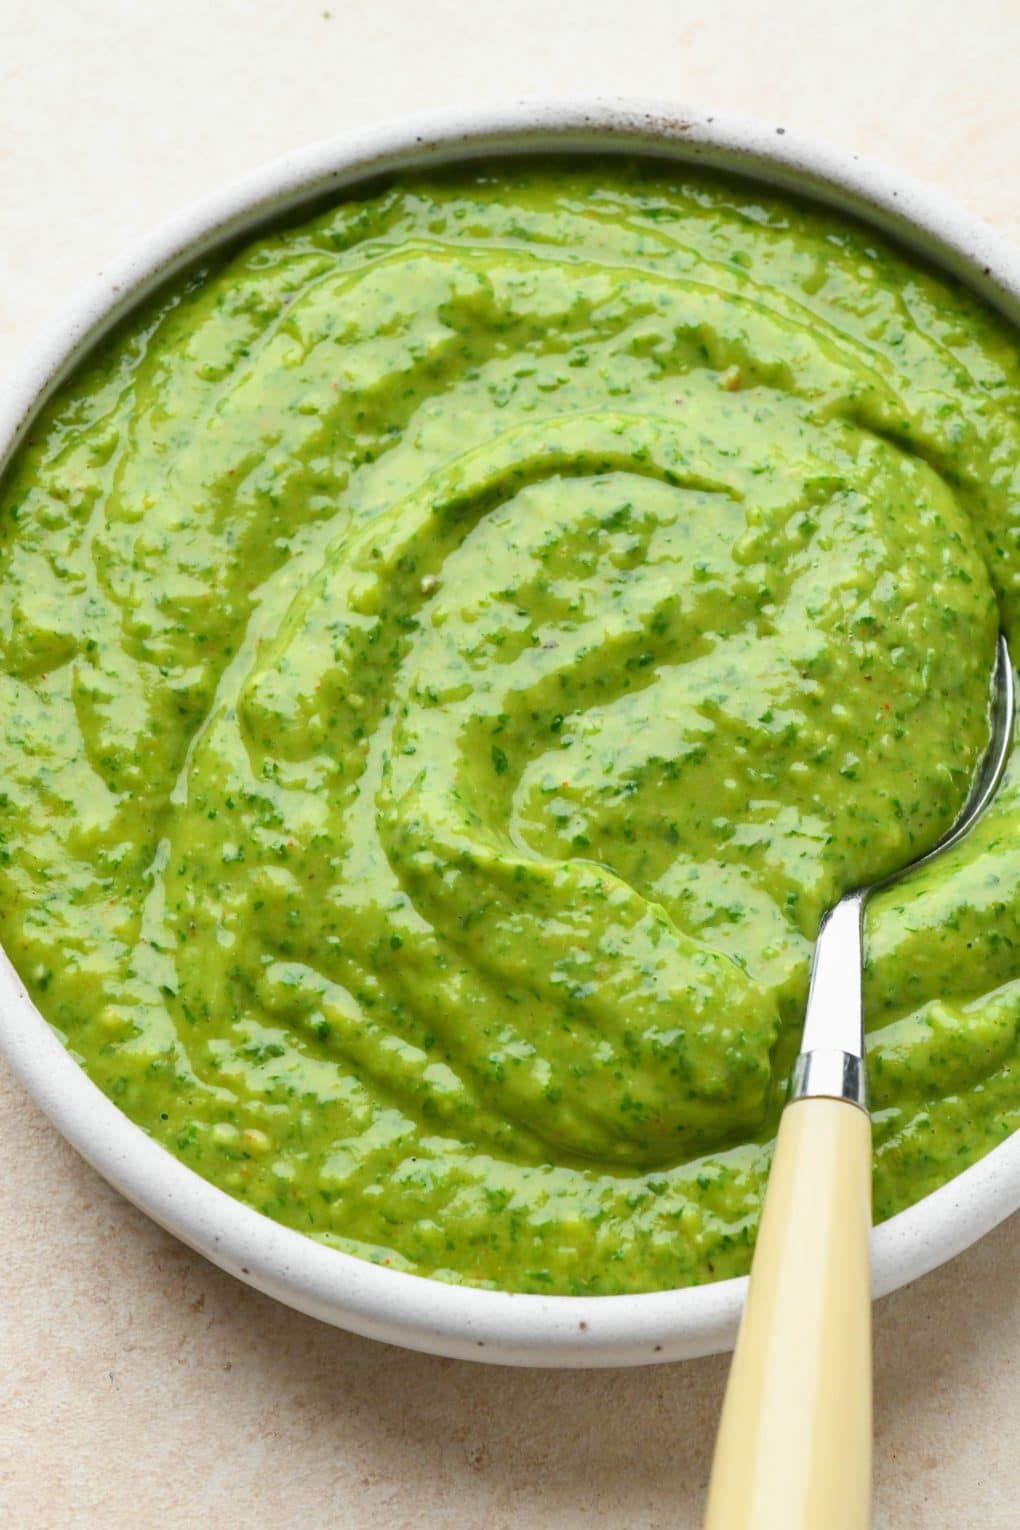 Side angle of avocado herb green sauce that shows the creamy texture of the finished sauce.